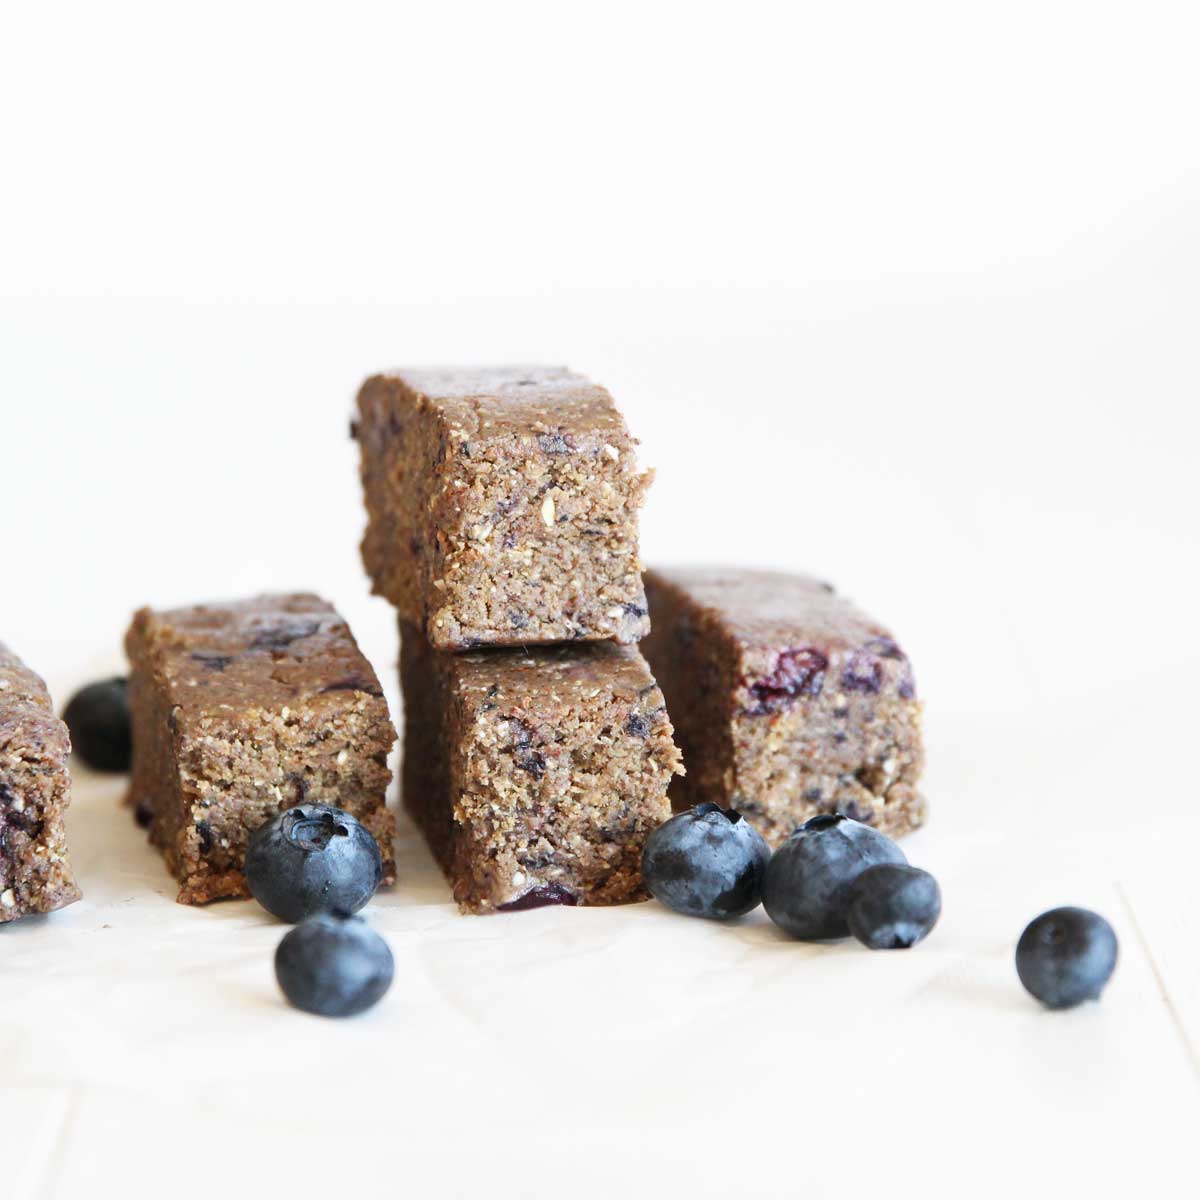 Homemade Blueberry Oatmeal Protein Bars (Healthy, Wholesome Vegan Recipe!) - Caramel Apple Dip